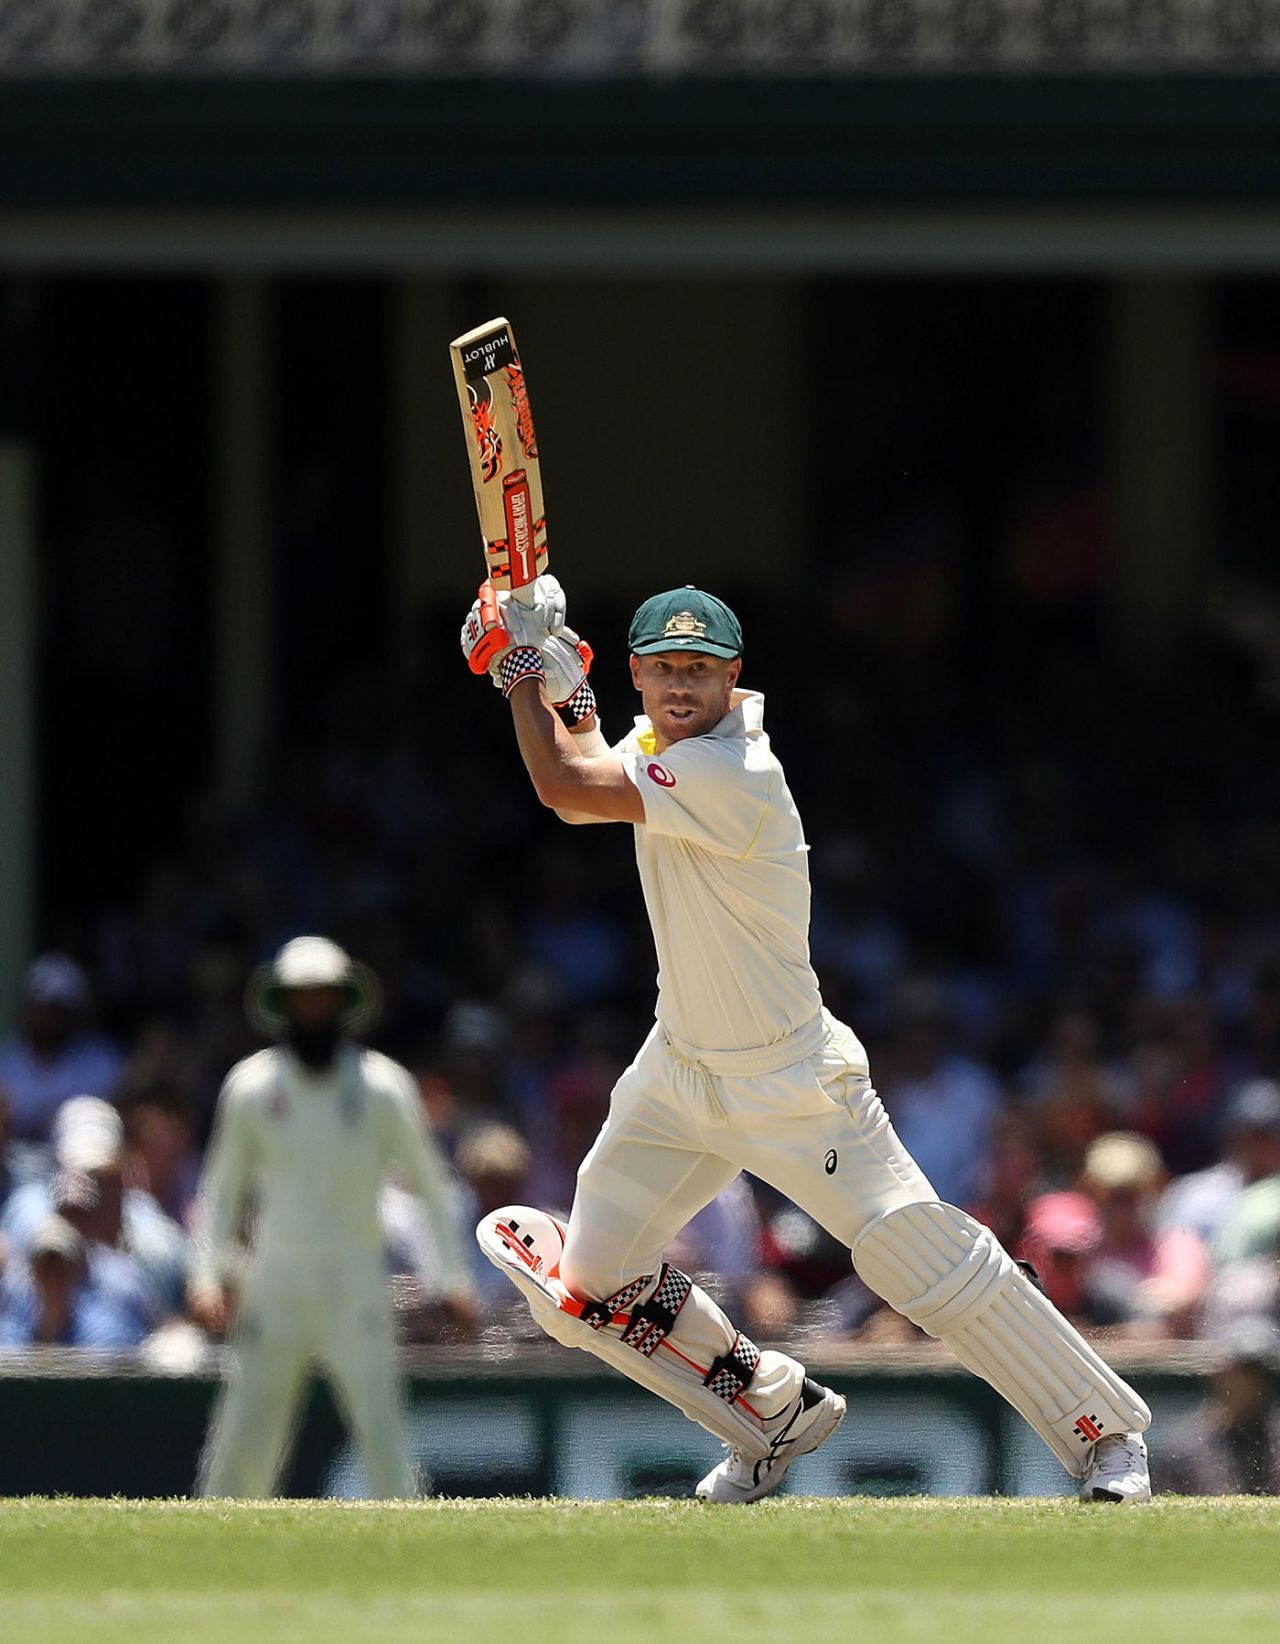 David Warner batted in a cap when England bowled two spinners, Australia v England, 5th Ashes Test, Sydney, 2nd day, January 5, 2018